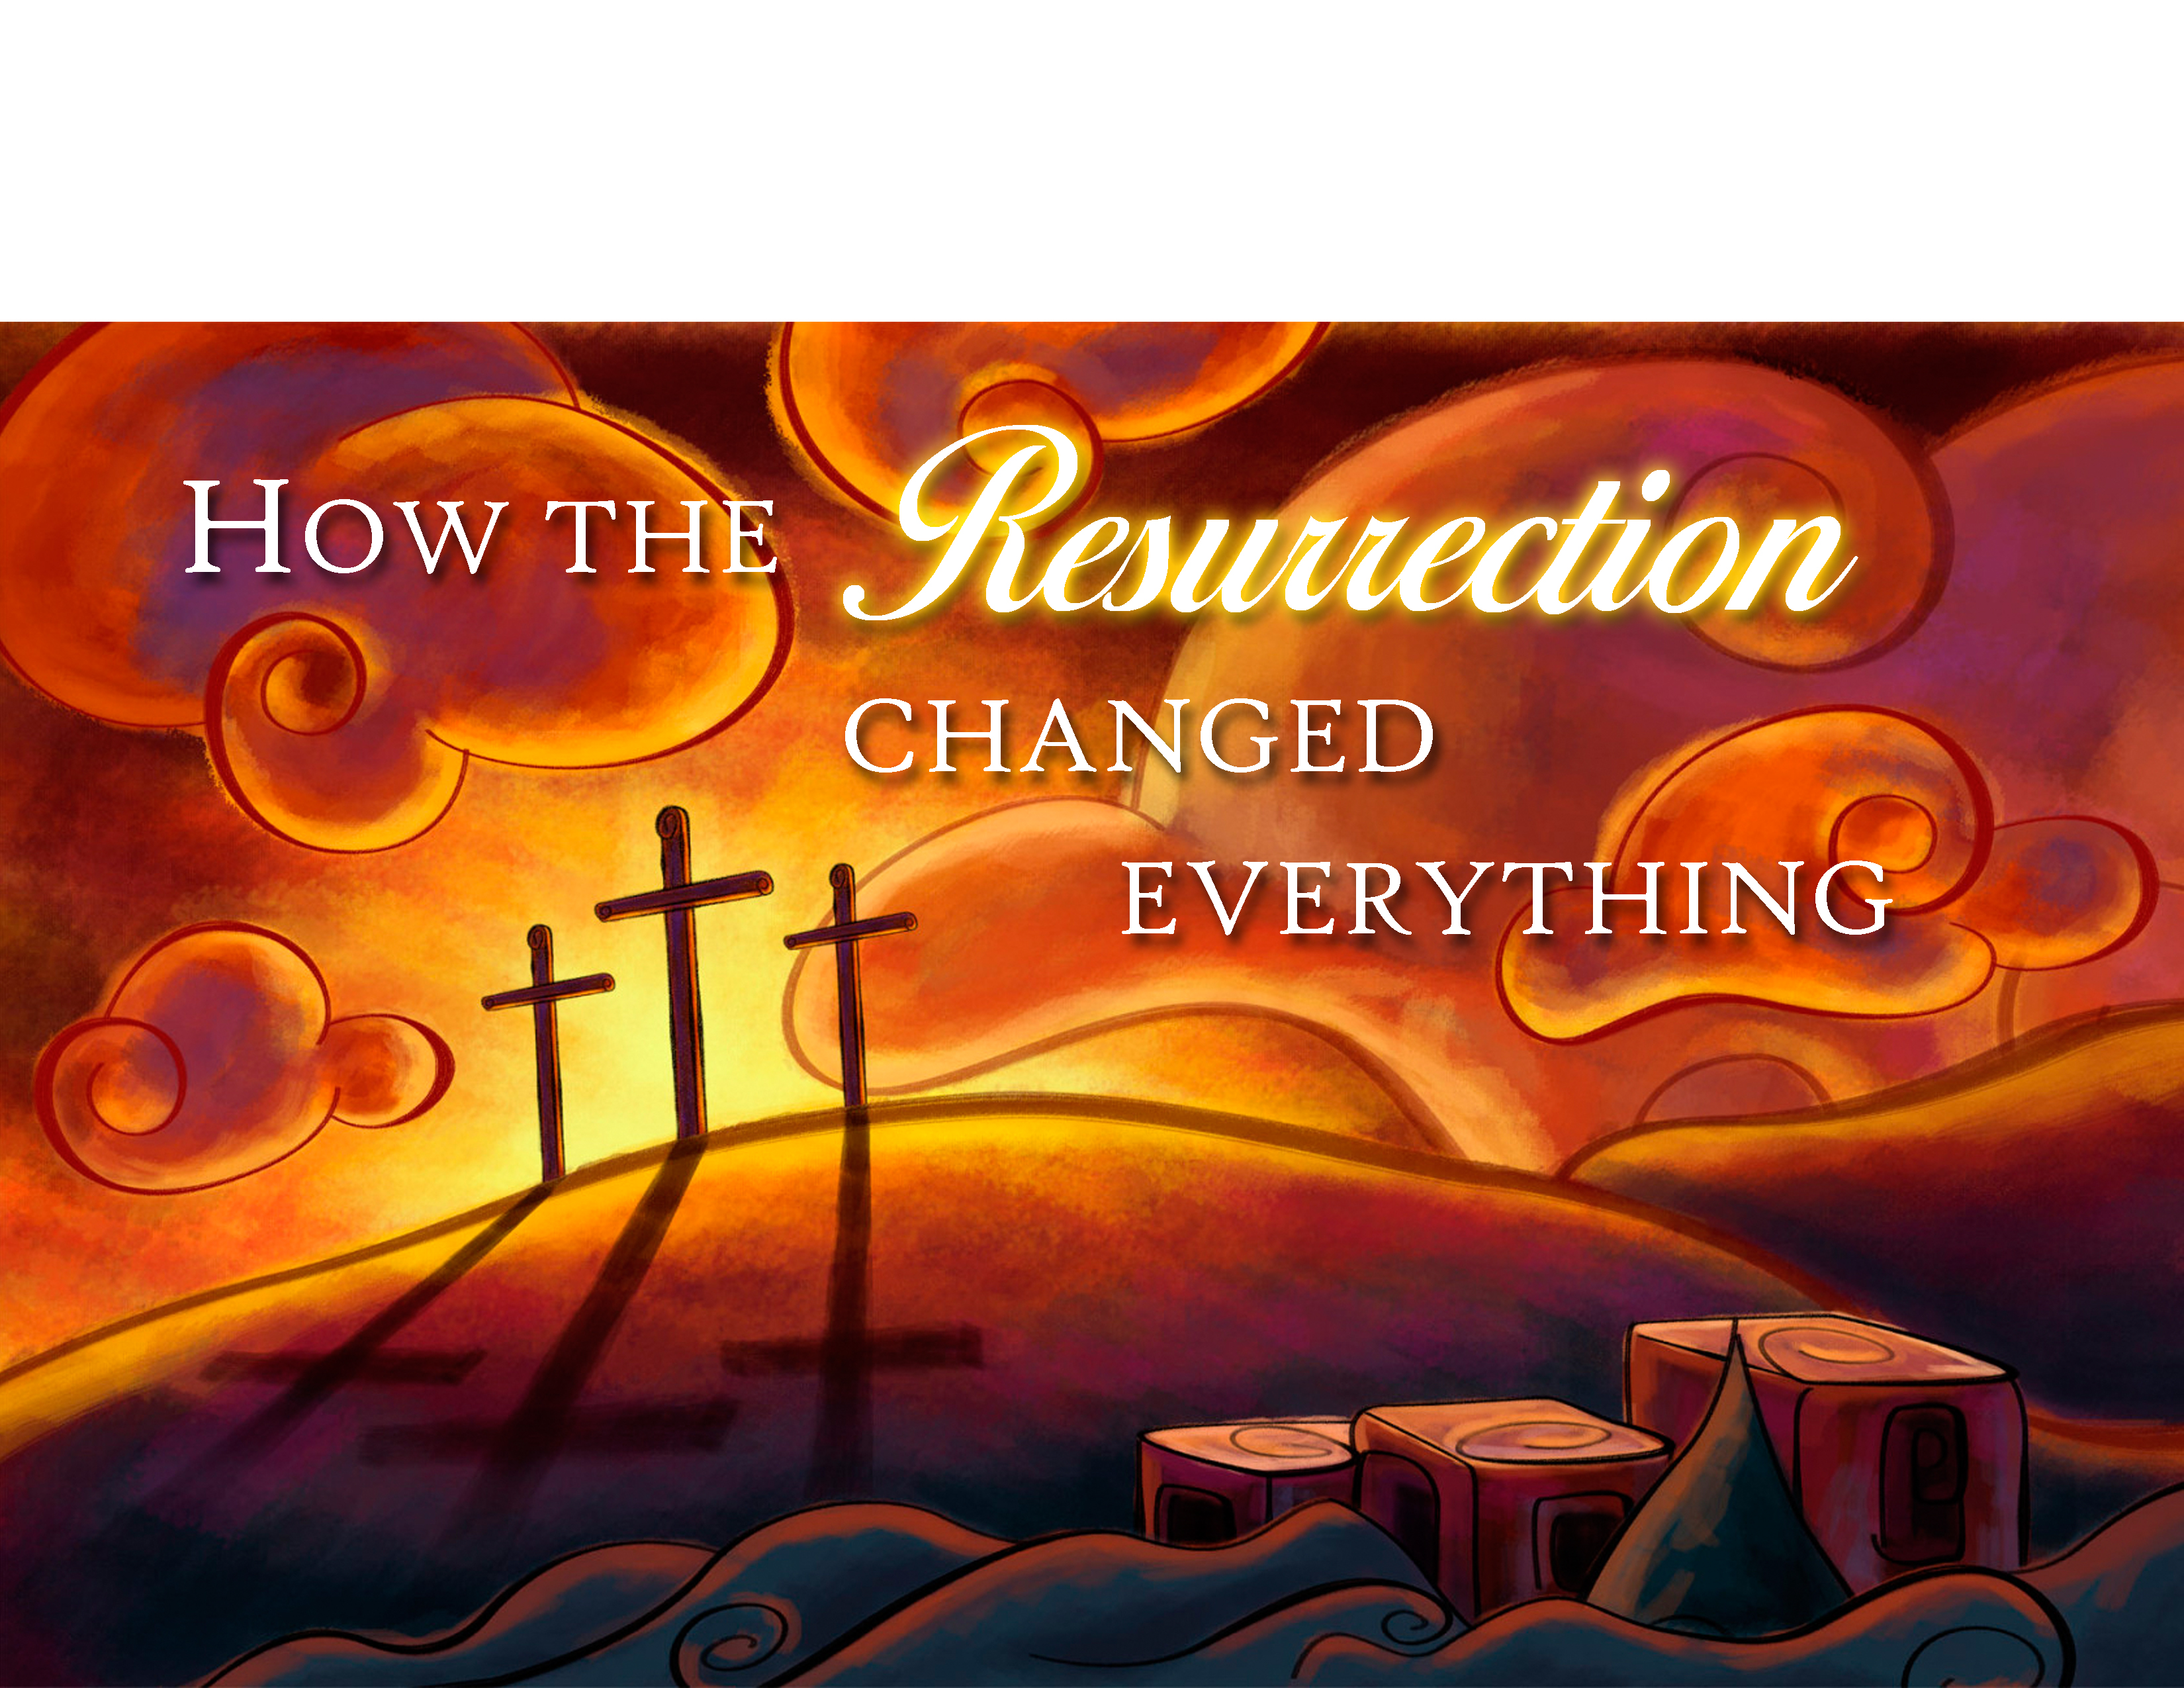 04-13-14 How the Resurrection Changed Everything Part 1